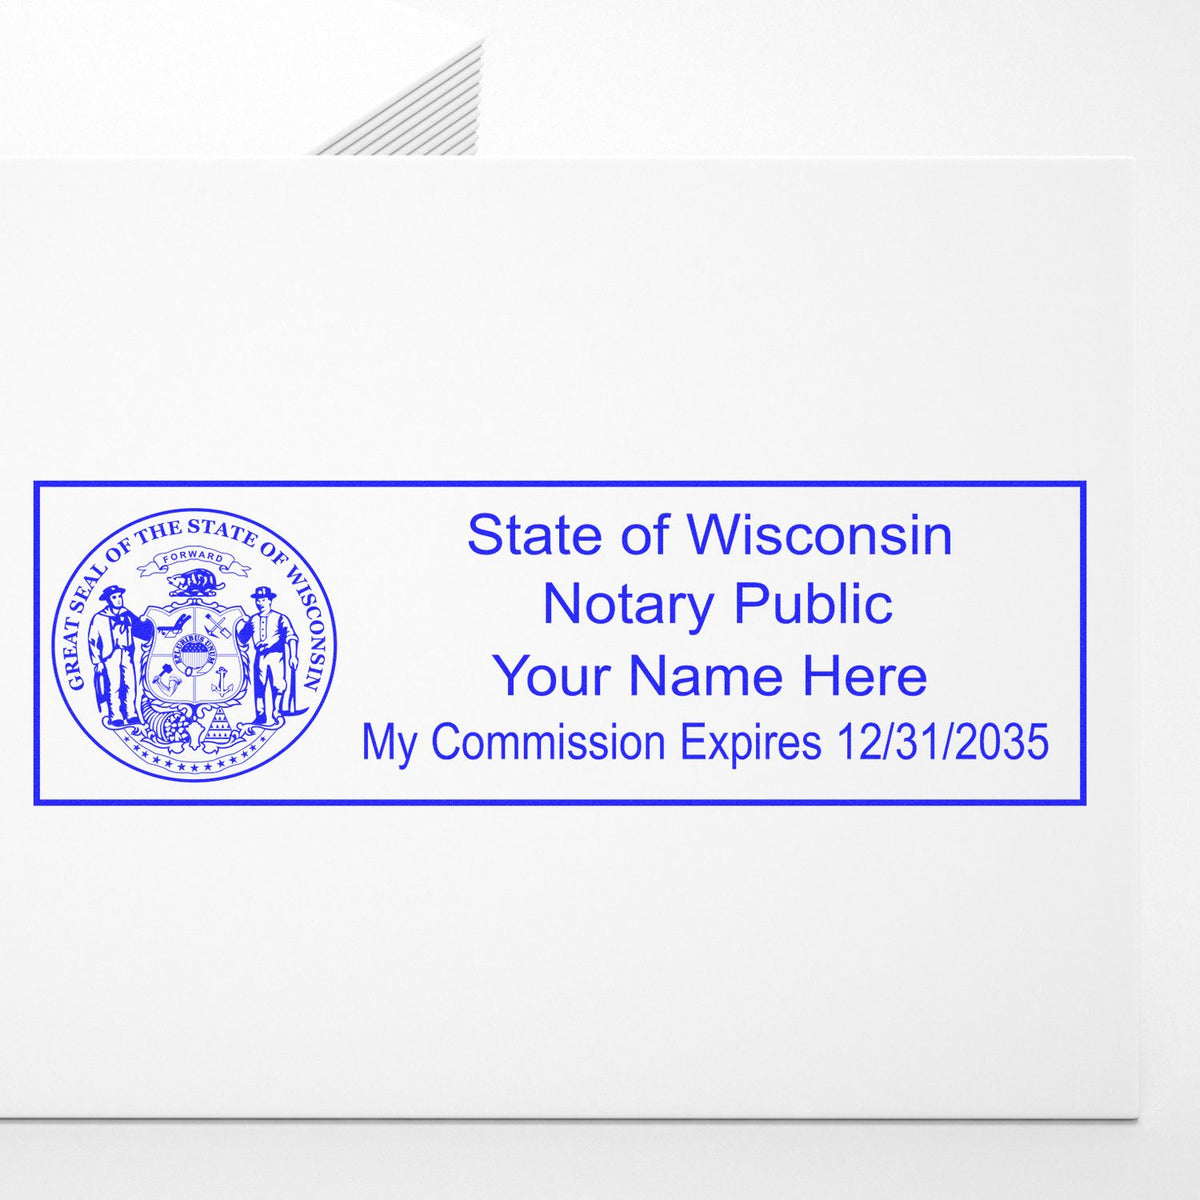 An alternative view of the PSI Wisconsin Notary Stamp stamped on a sheet of paper showing the image in use